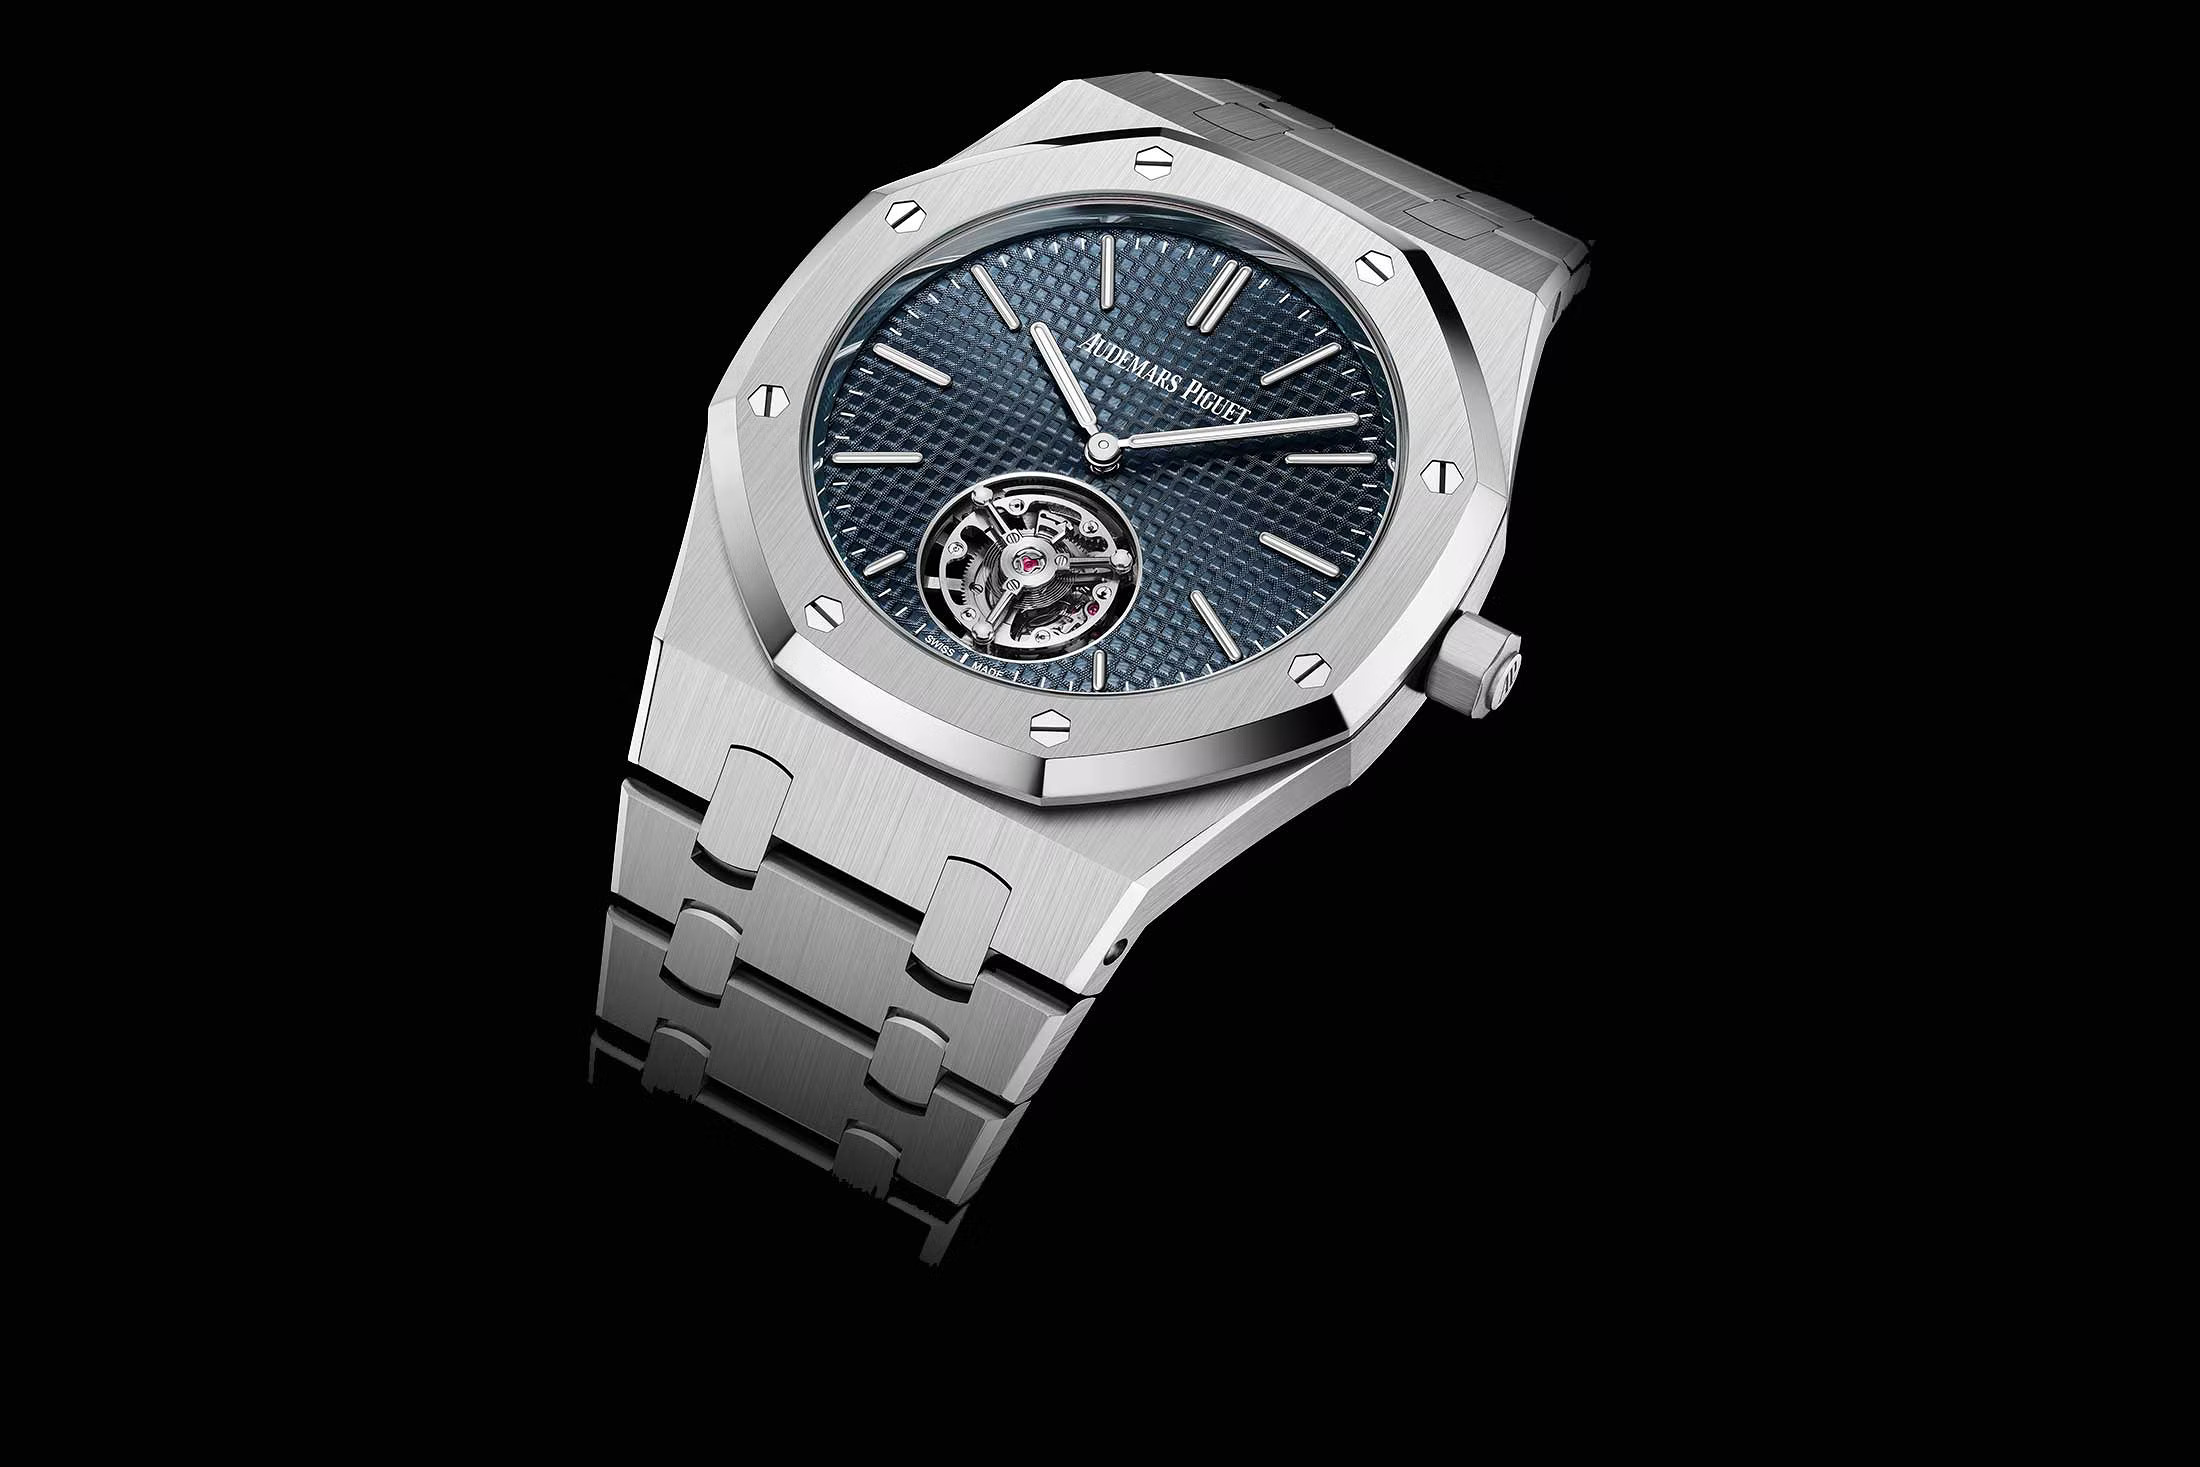 Audemars Piguet Royal Oak Jumbo for £78,052 for sale from a Private Seller  on Chrono24